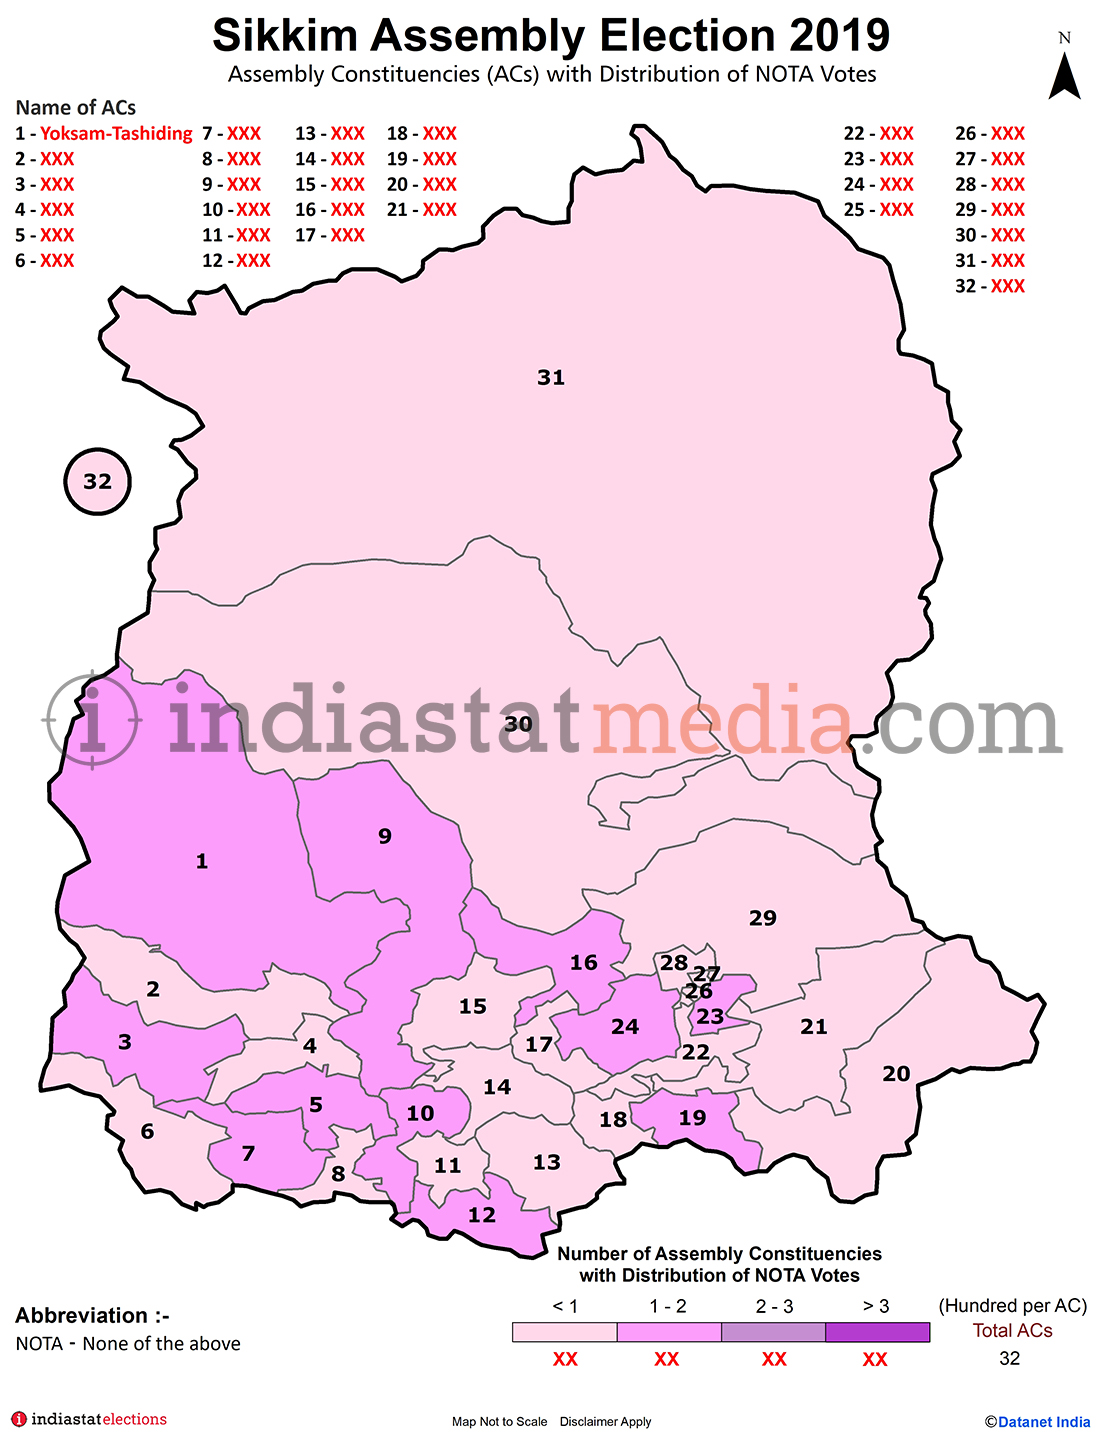 Distribution of NOTA Votes by Constituencies in Sikkim (Assembly Election - 2019)